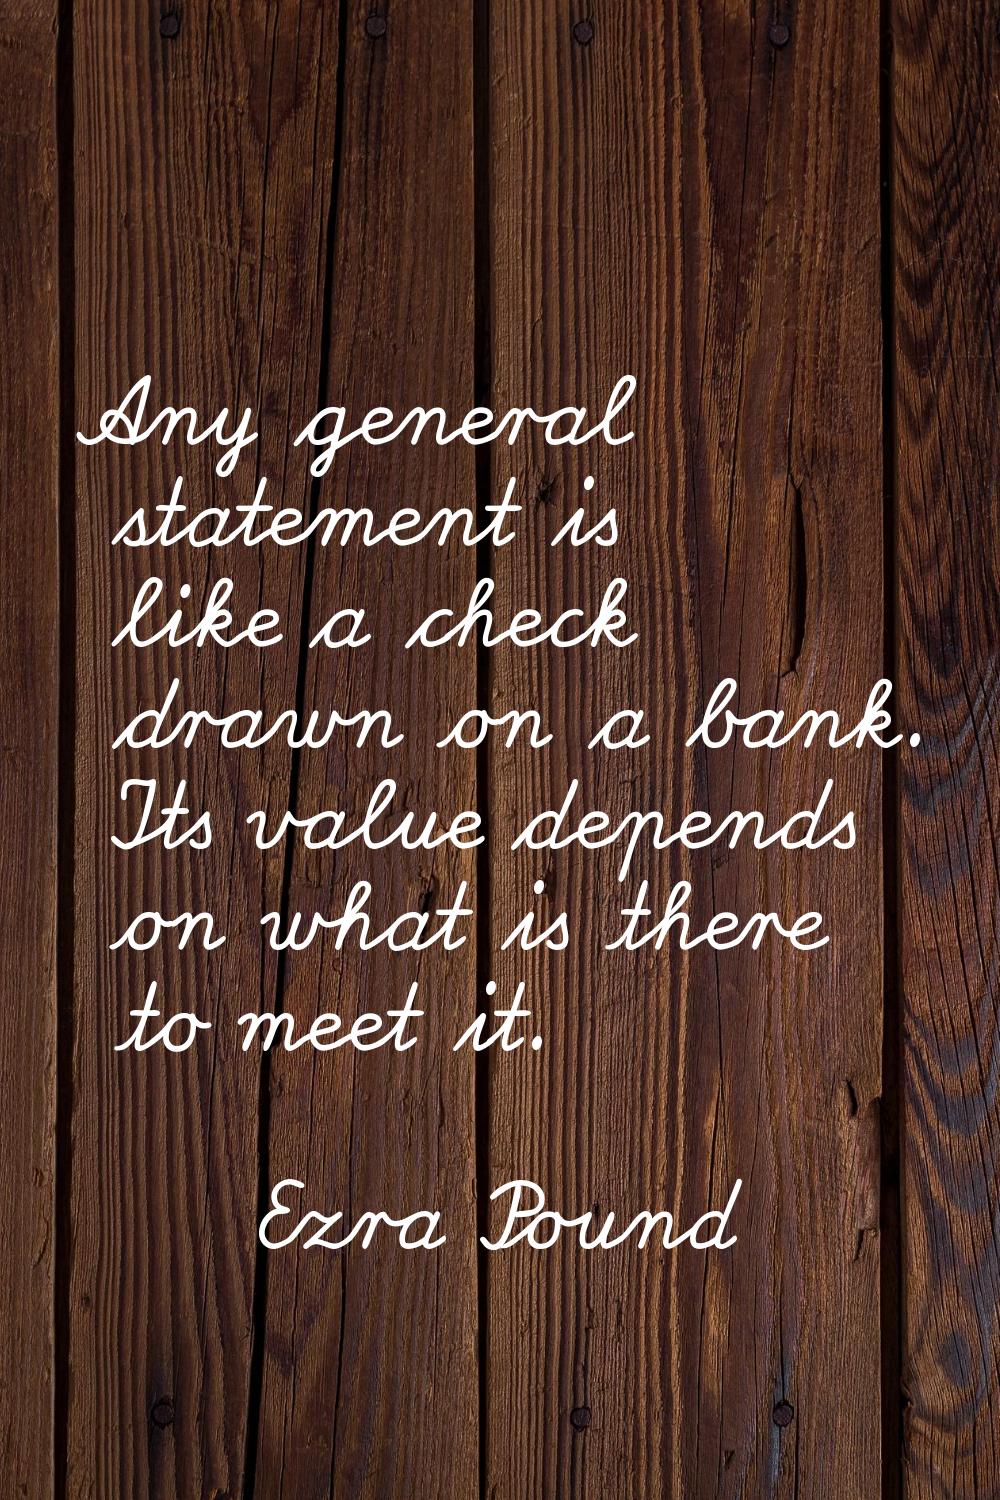 Any general statement is like a check drawn on a bank. Its value depends on what is there to meet i